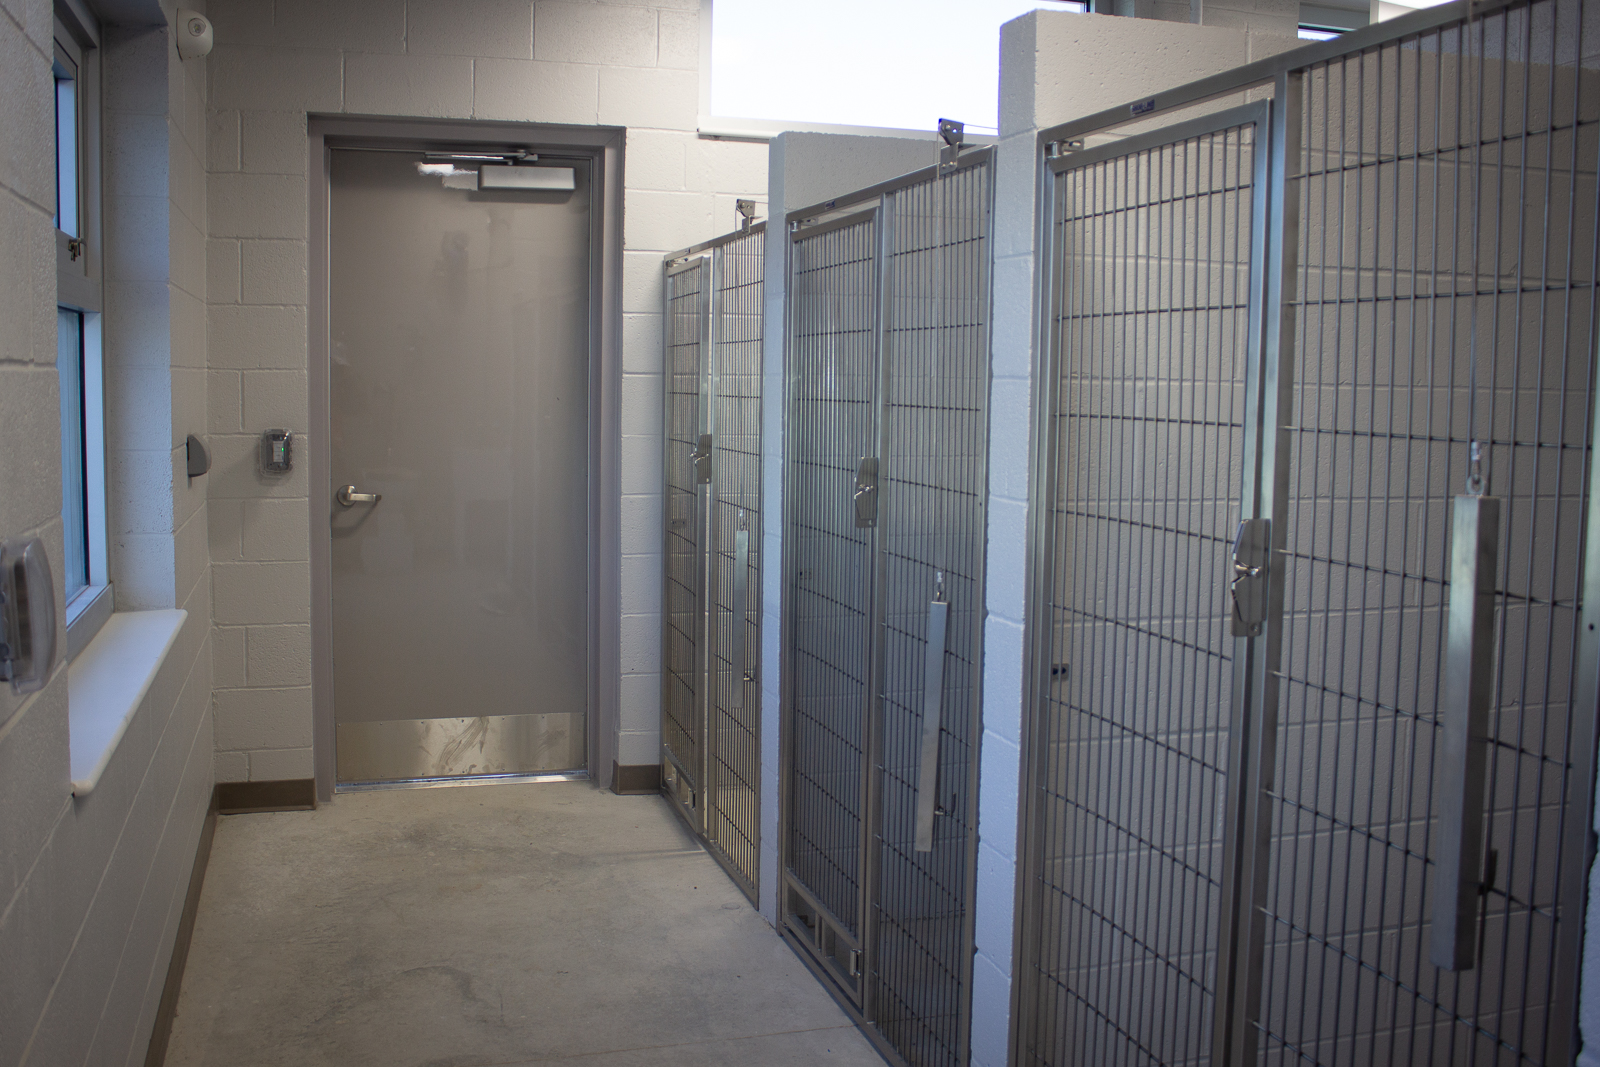 Photo of temporary dog holding area in the animal control portion of the shelter.